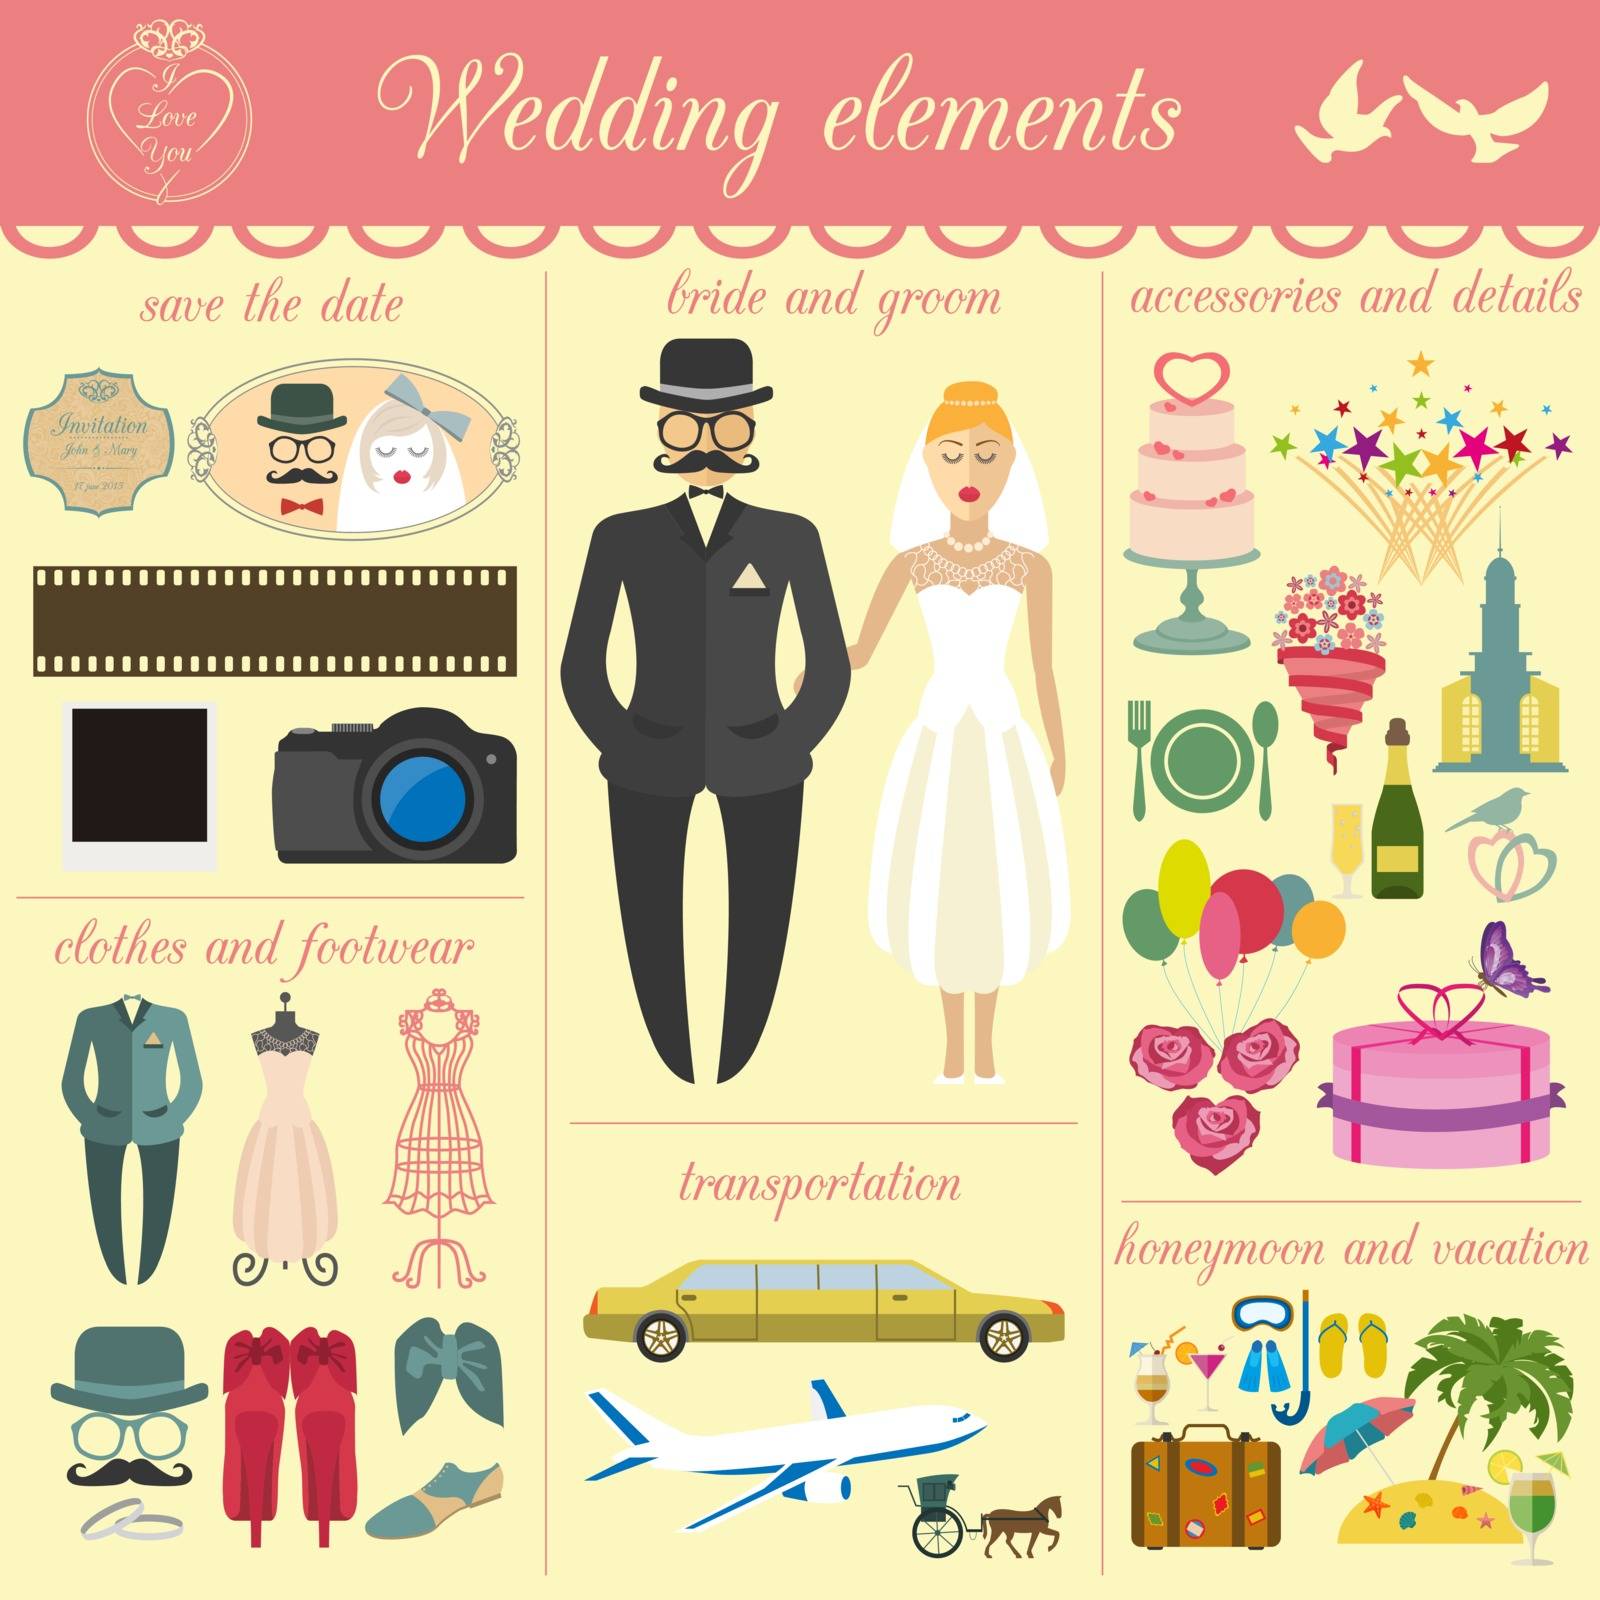 Set of vintage wedding, fashion style and travel infographic elements, templates. Vector illustration